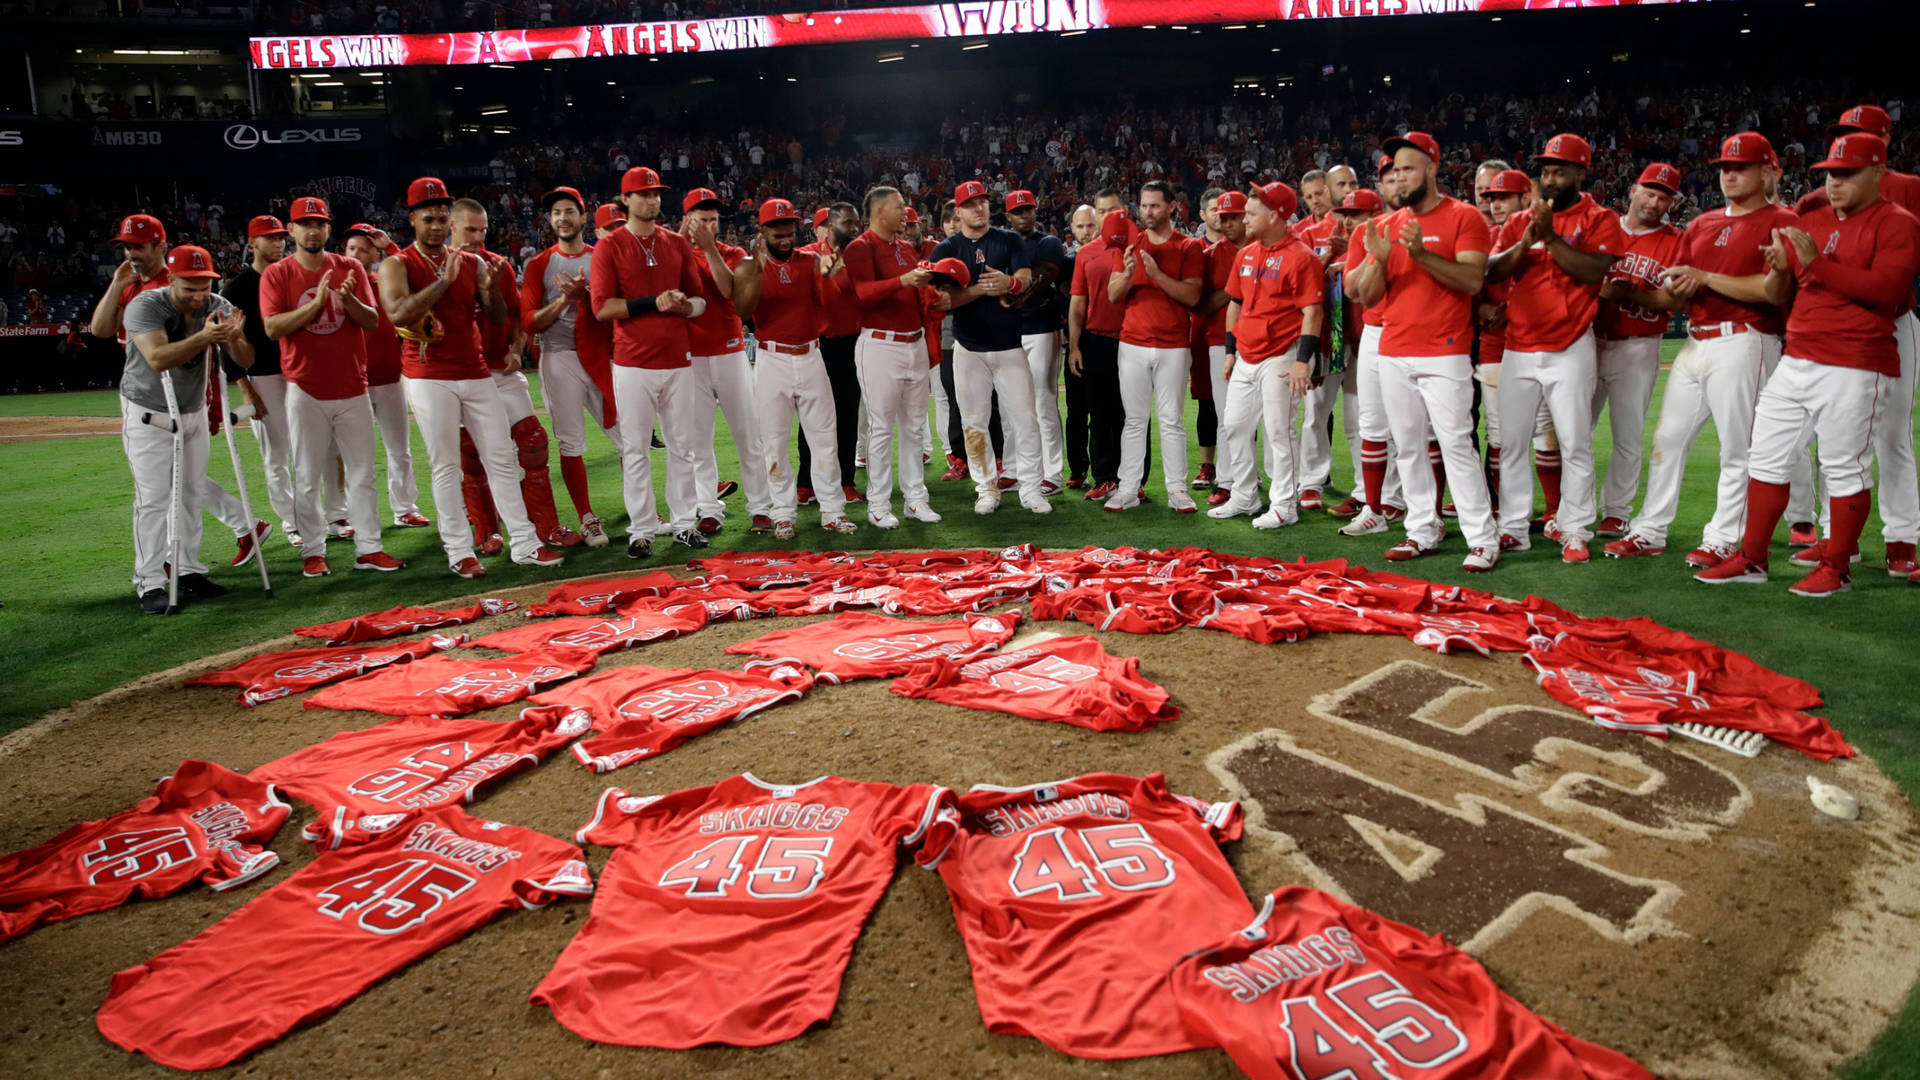 Los Angeles Angels Skaggs Jerseys With Players Background